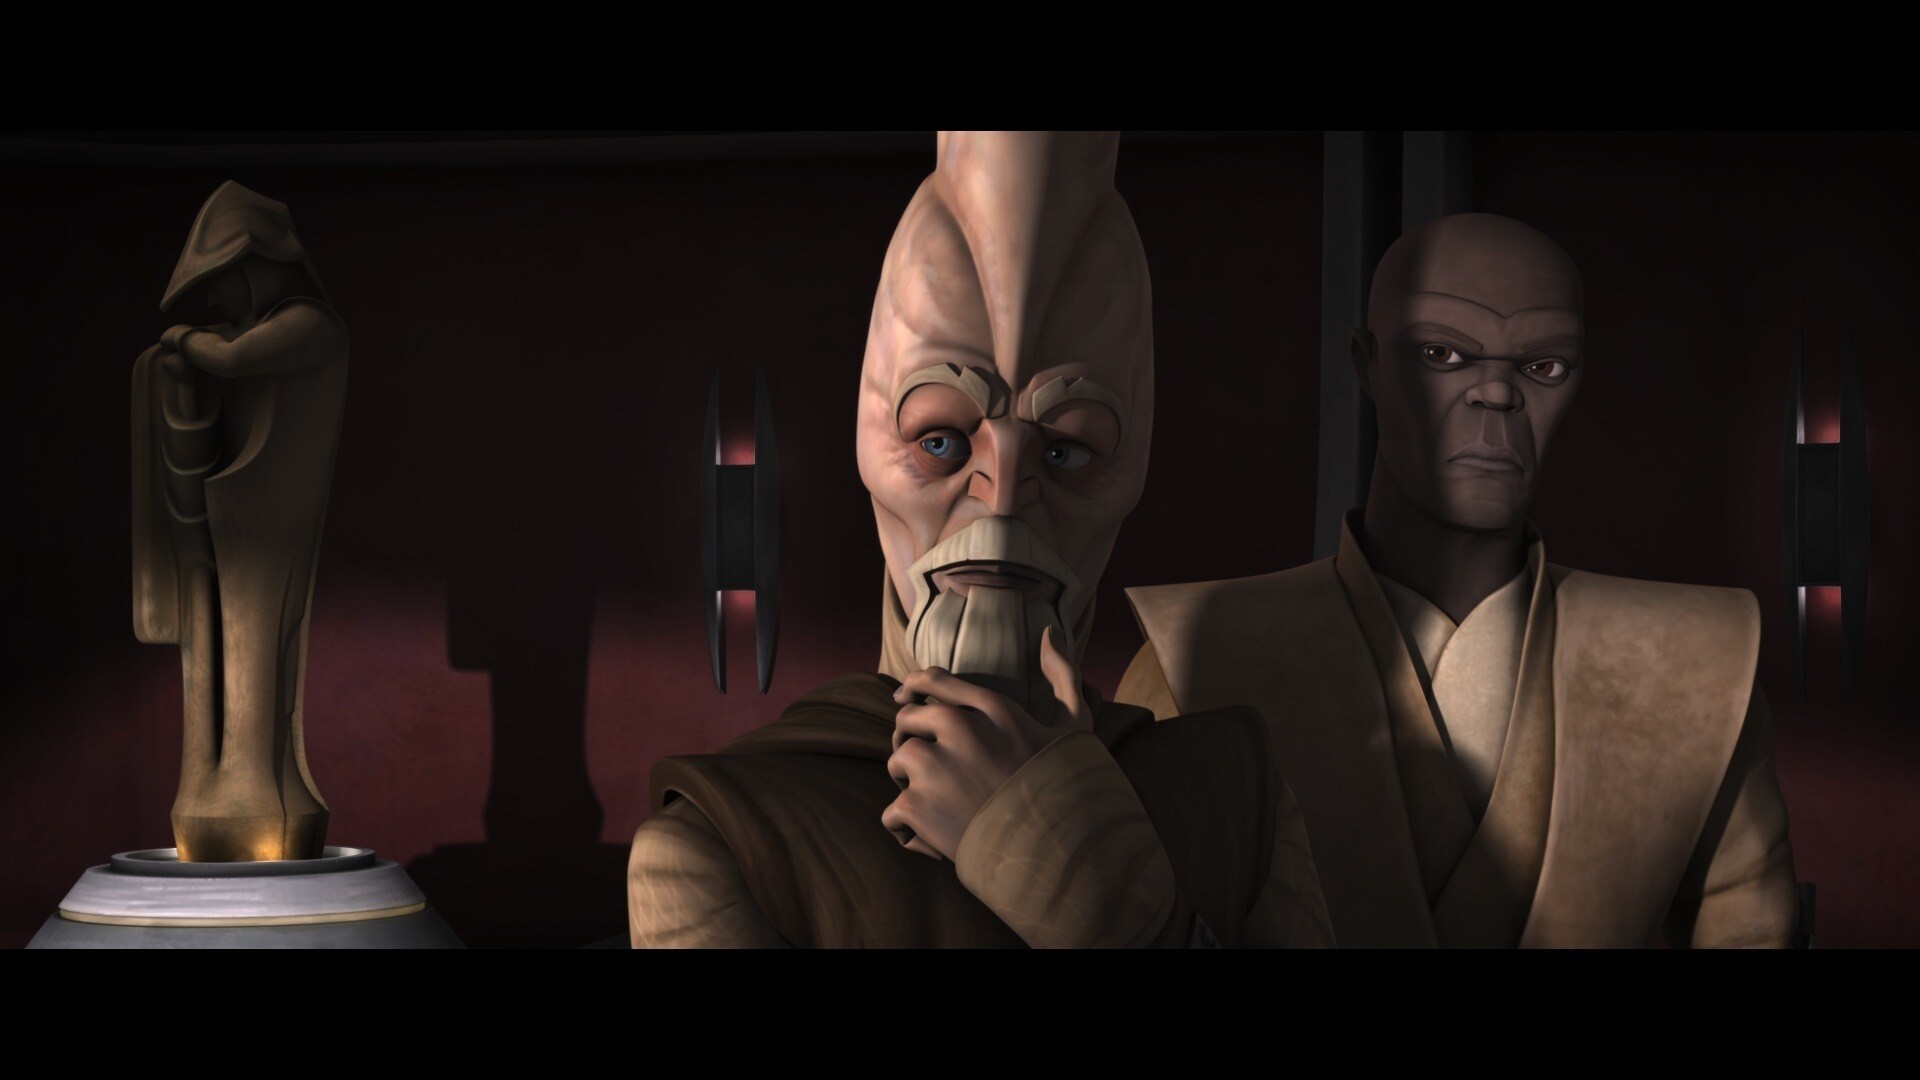 Inside Palpatine's office standing amidst Senators and Jedi, Rush stands accused by Bail Organa o...